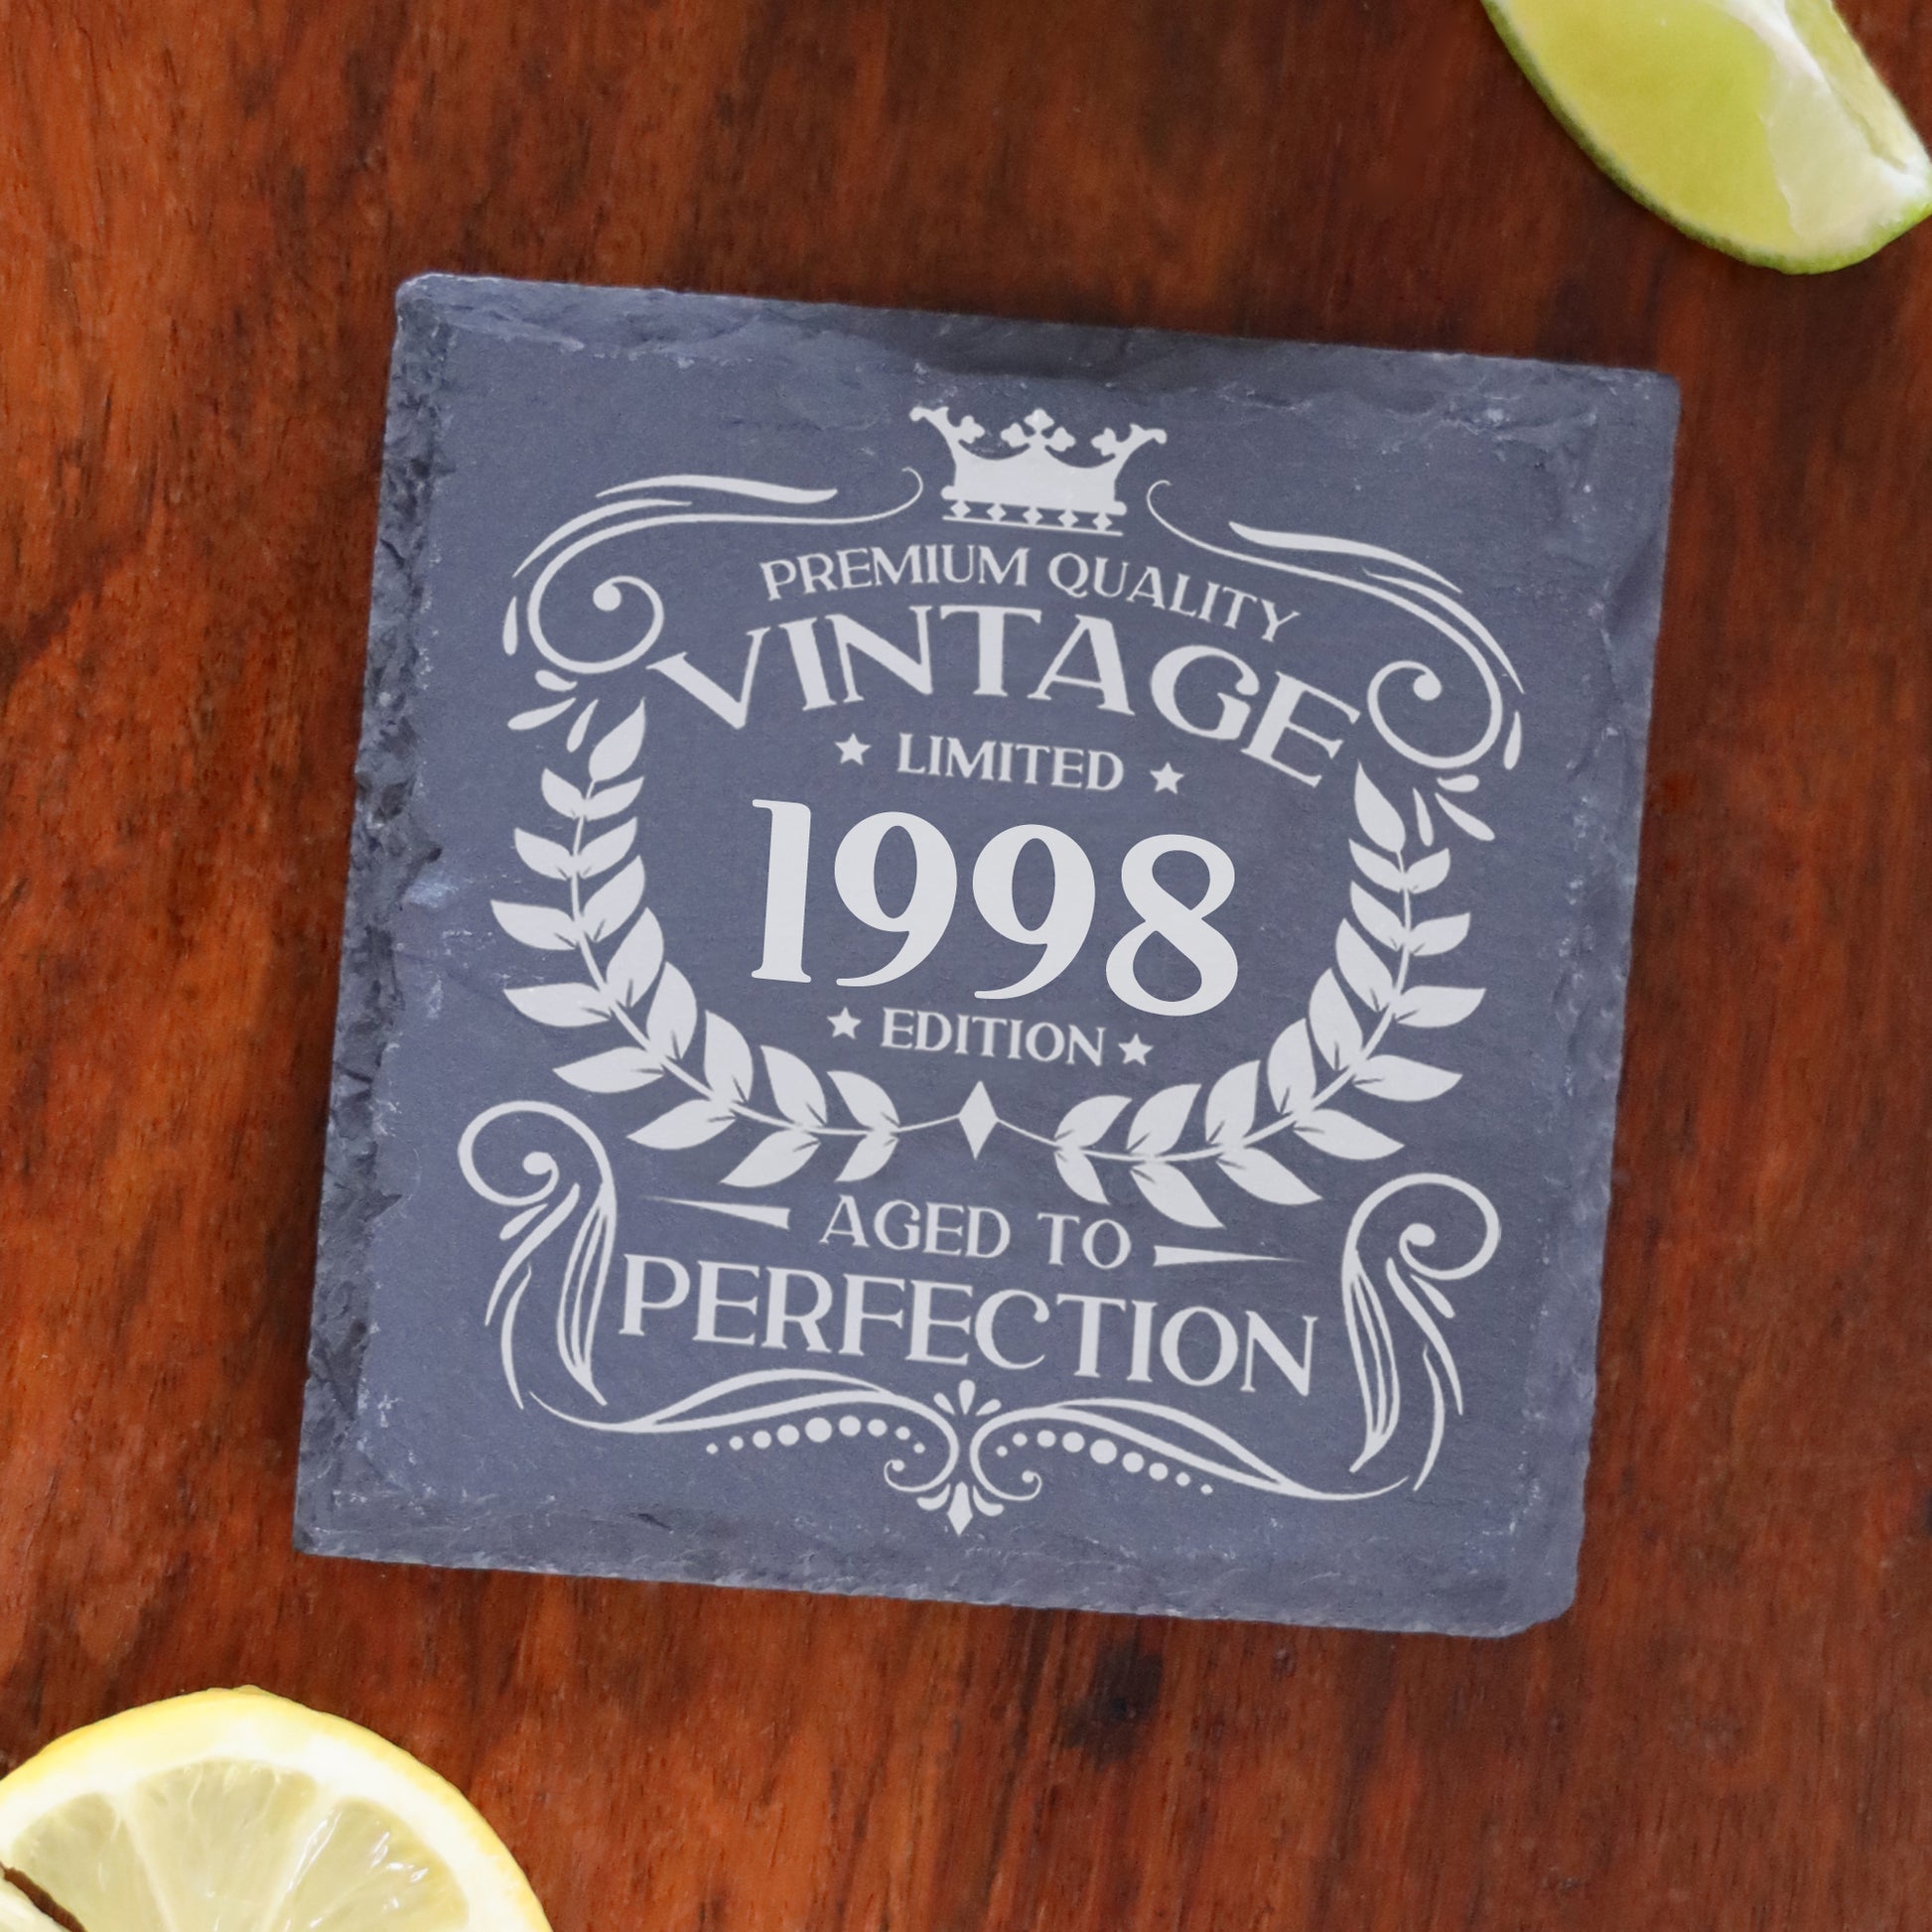 Vintage 1998 25th Birthday Engraved Gin Glass Gift  - Always Looking Good - Square Coaster Only  